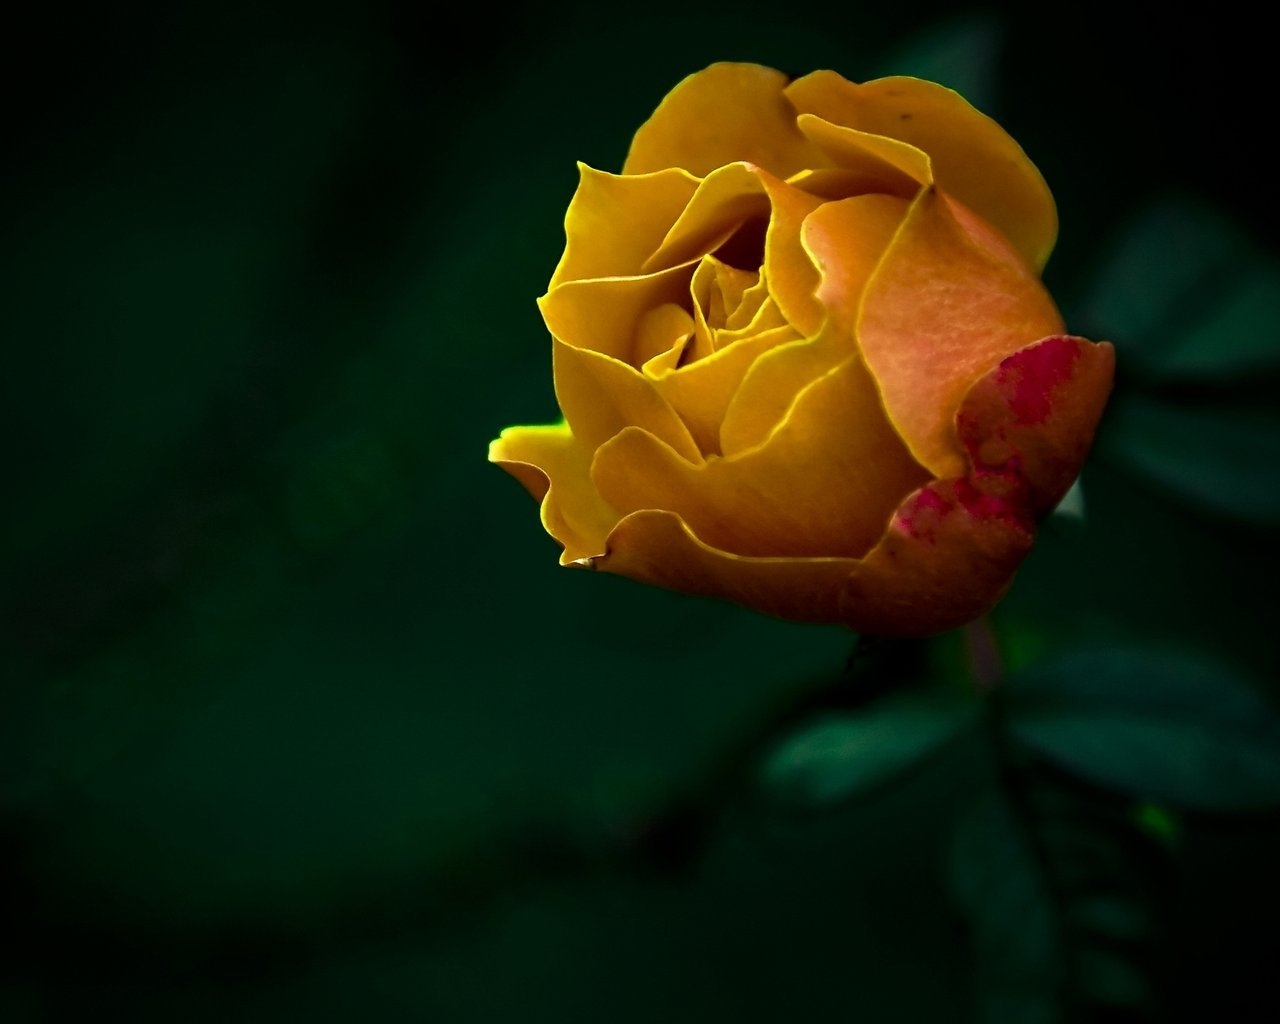 The last Rose for 1280 x 1024 resolution